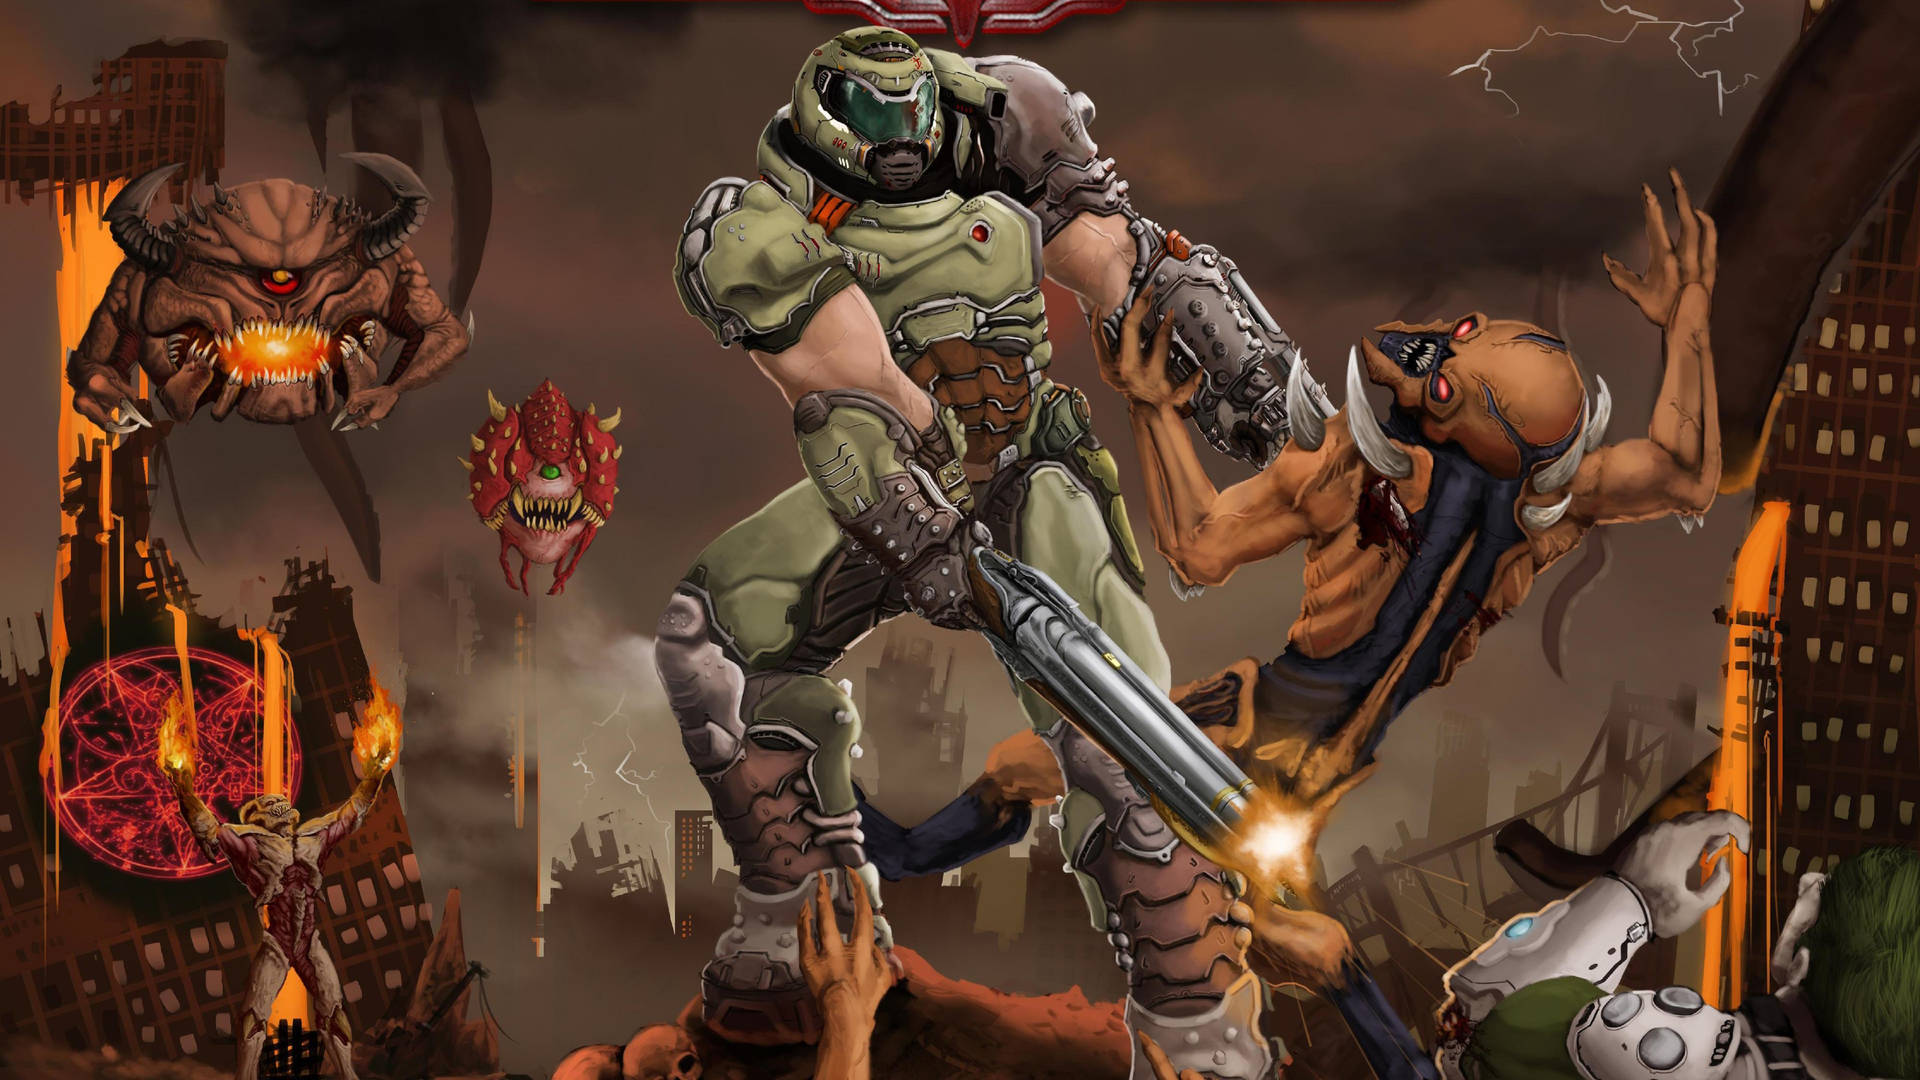 Doomguy In Action - Classic Video Game Cover Art